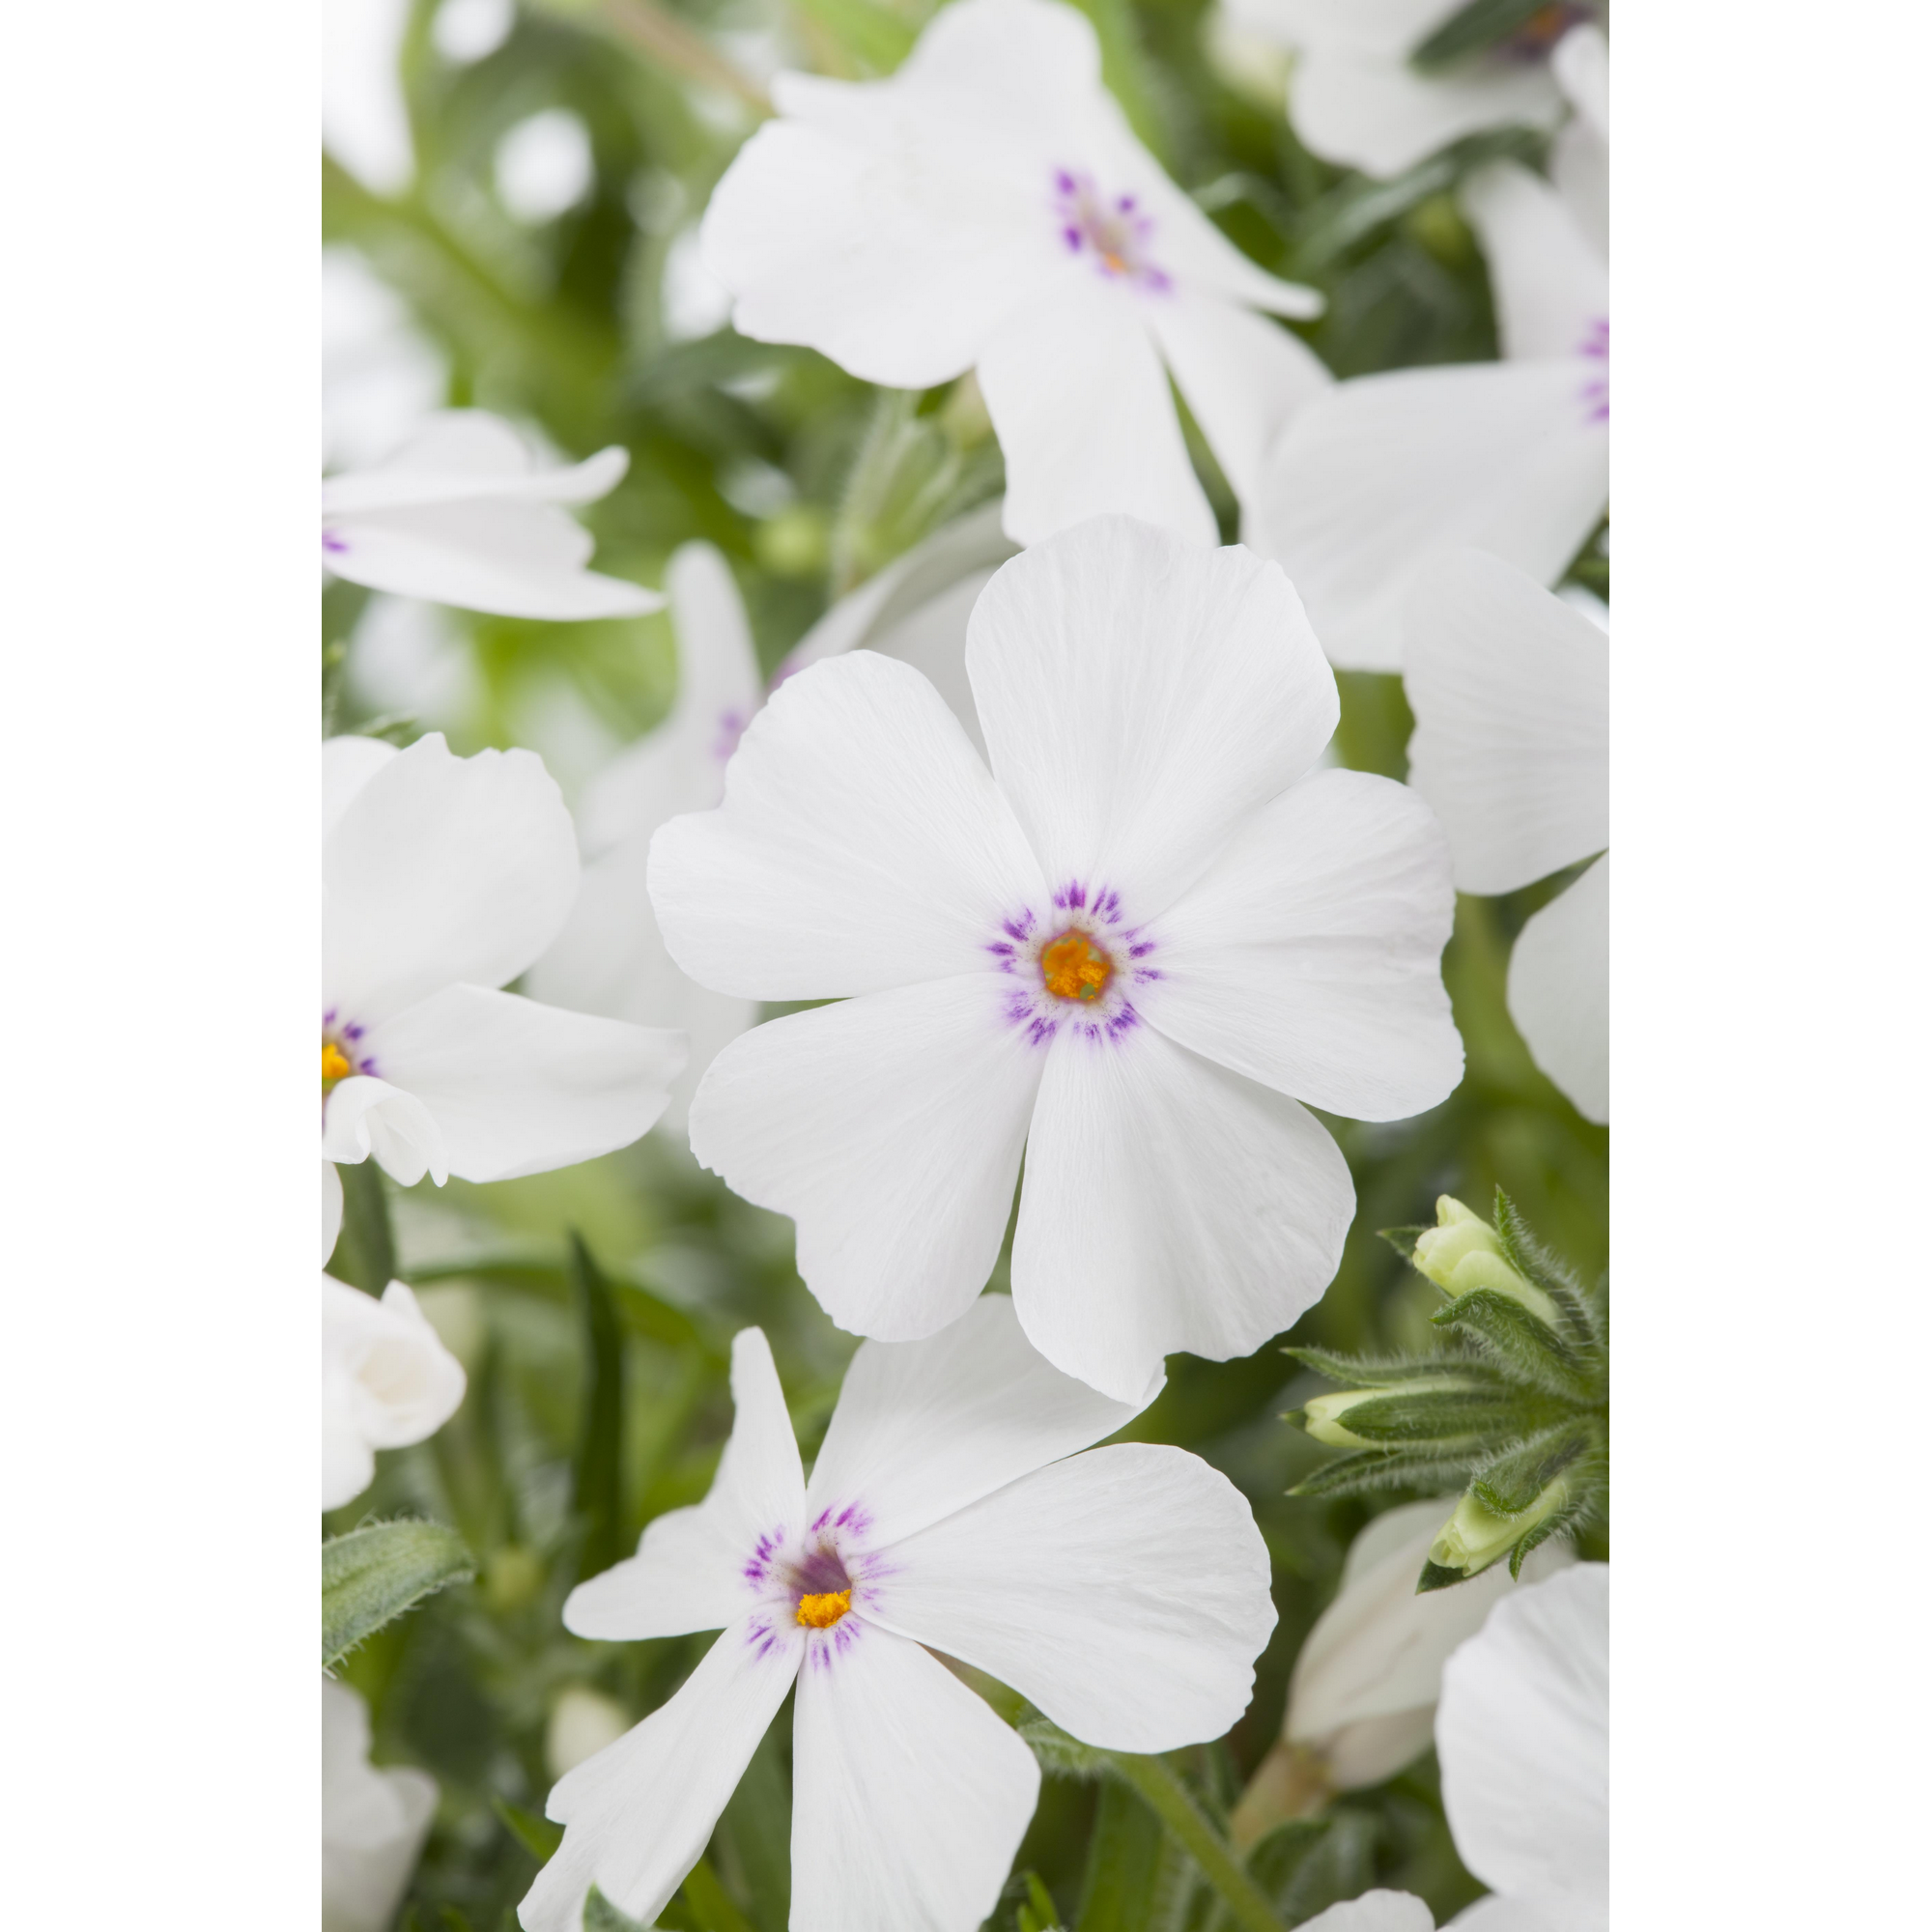 Polsterphlox, 9 cm Topf, 3er-Set + product picture